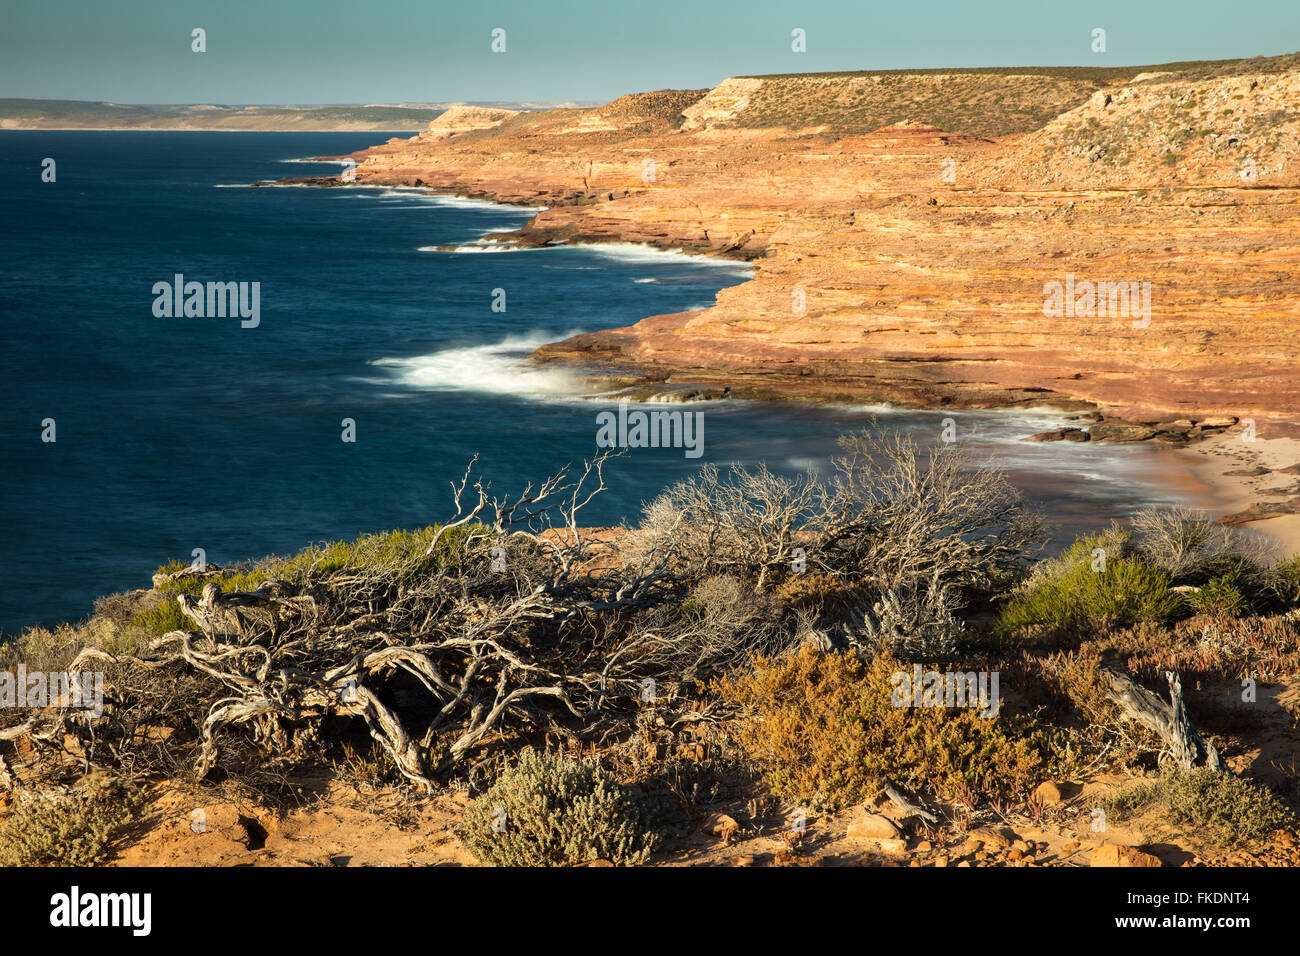 Gantheaume Bay from the Eagle lookout, Kalbarri National Park, Western Australia Stock Photo